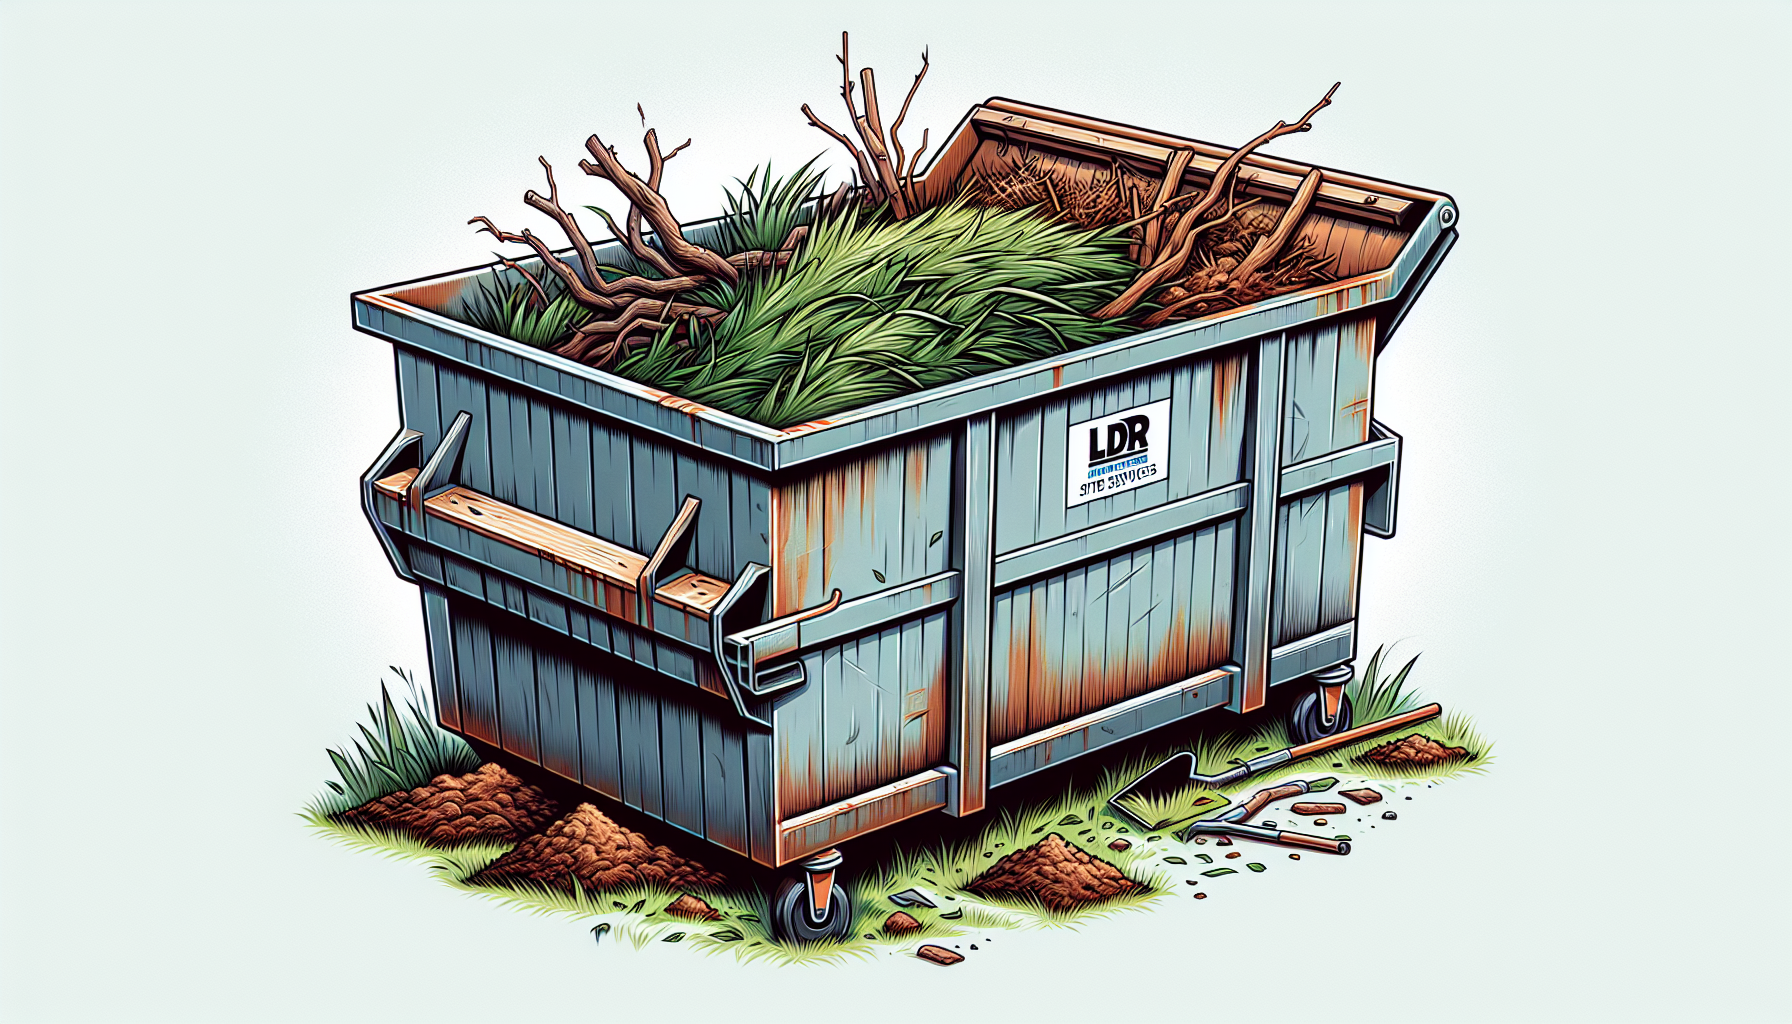 Yard waste dumpster for landscaping projects